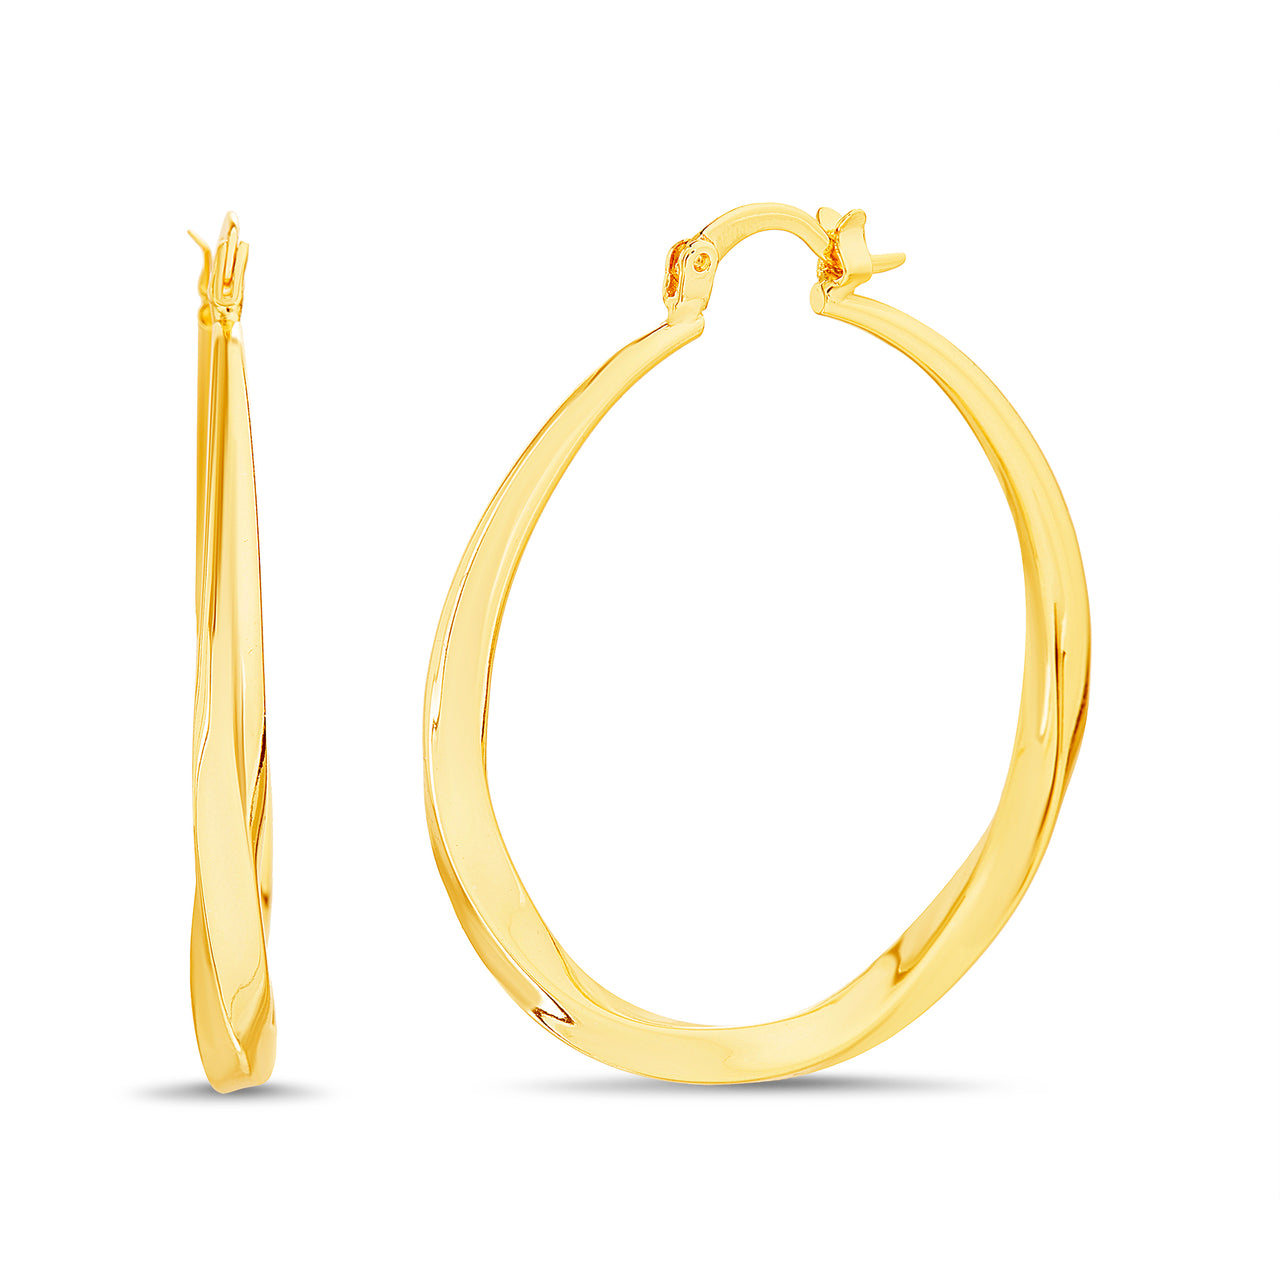 Polished Twisted Hinge Hoop Earrings in Yellow Gold or Rhodium Plated Brass